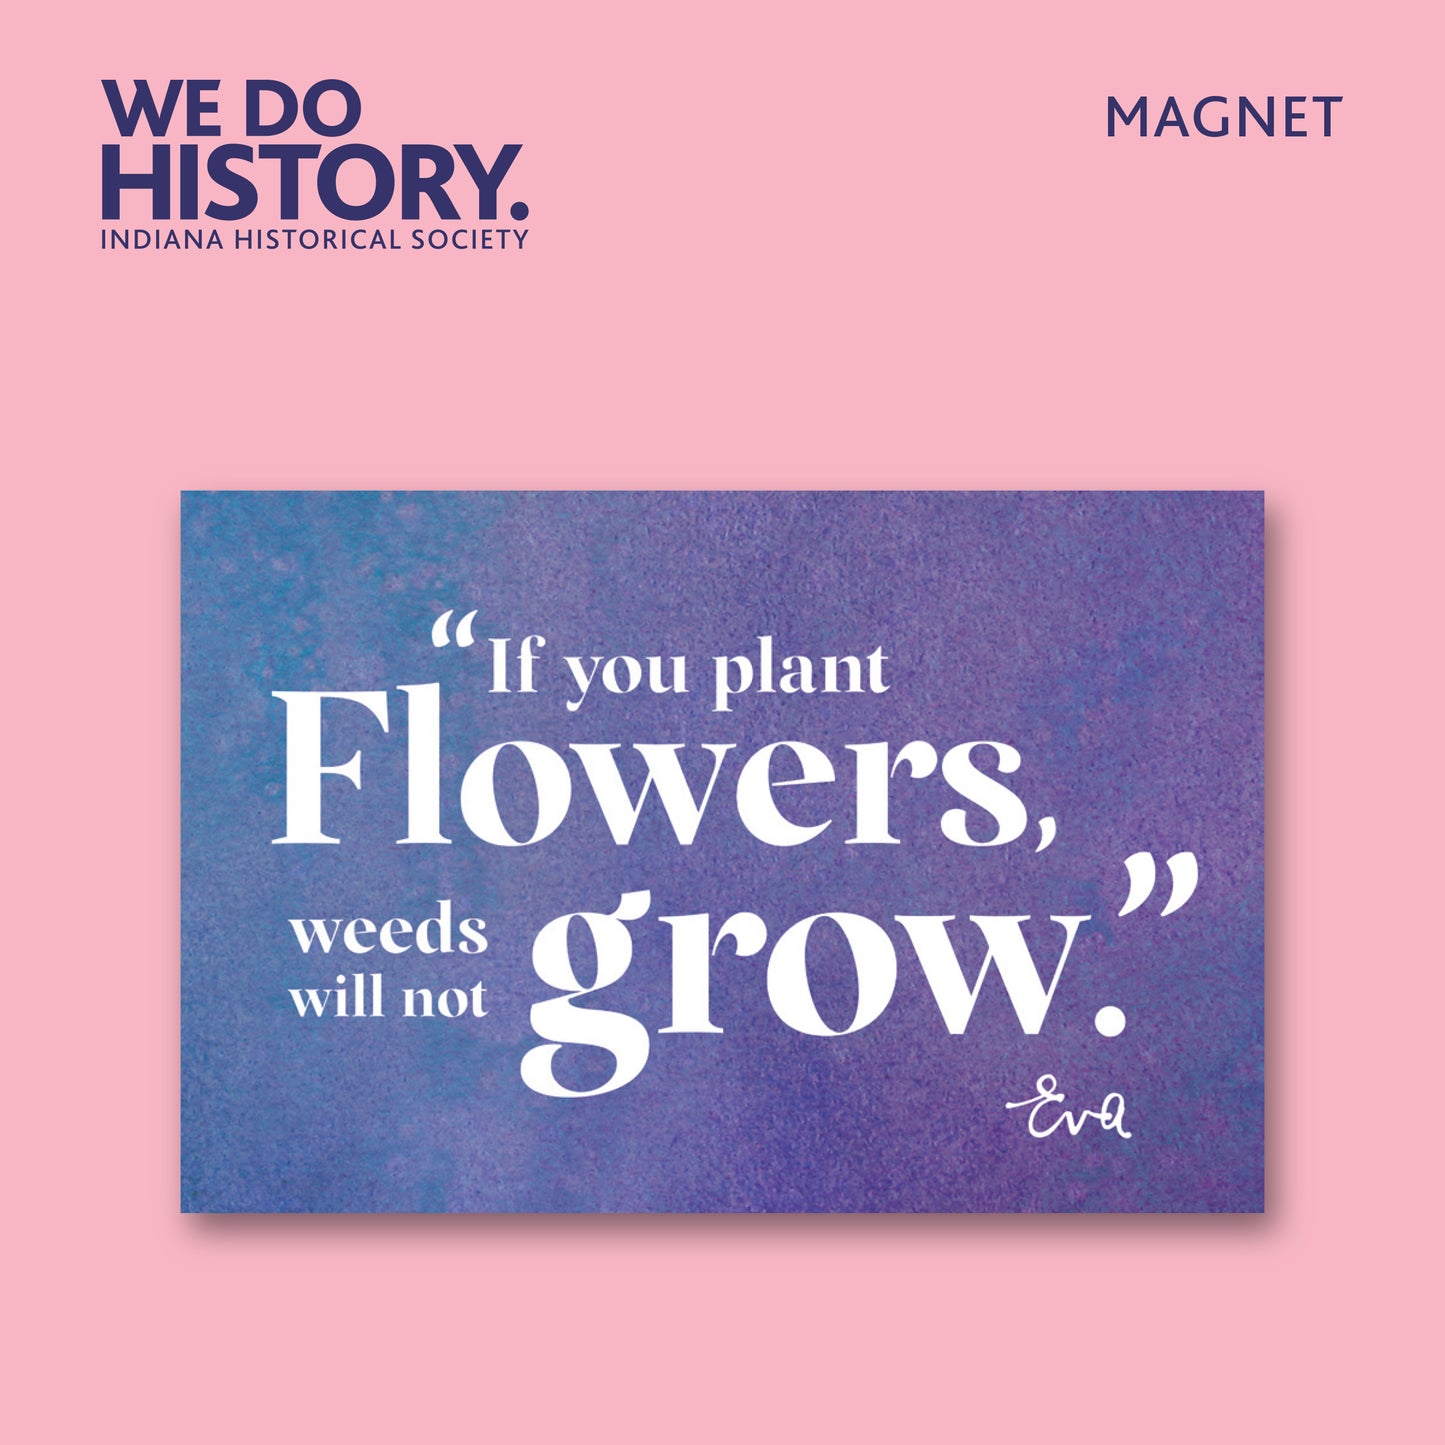 "If You Plant Flowers, Weeds Will Not Grow" Eva Kor Quote Carded Magnet